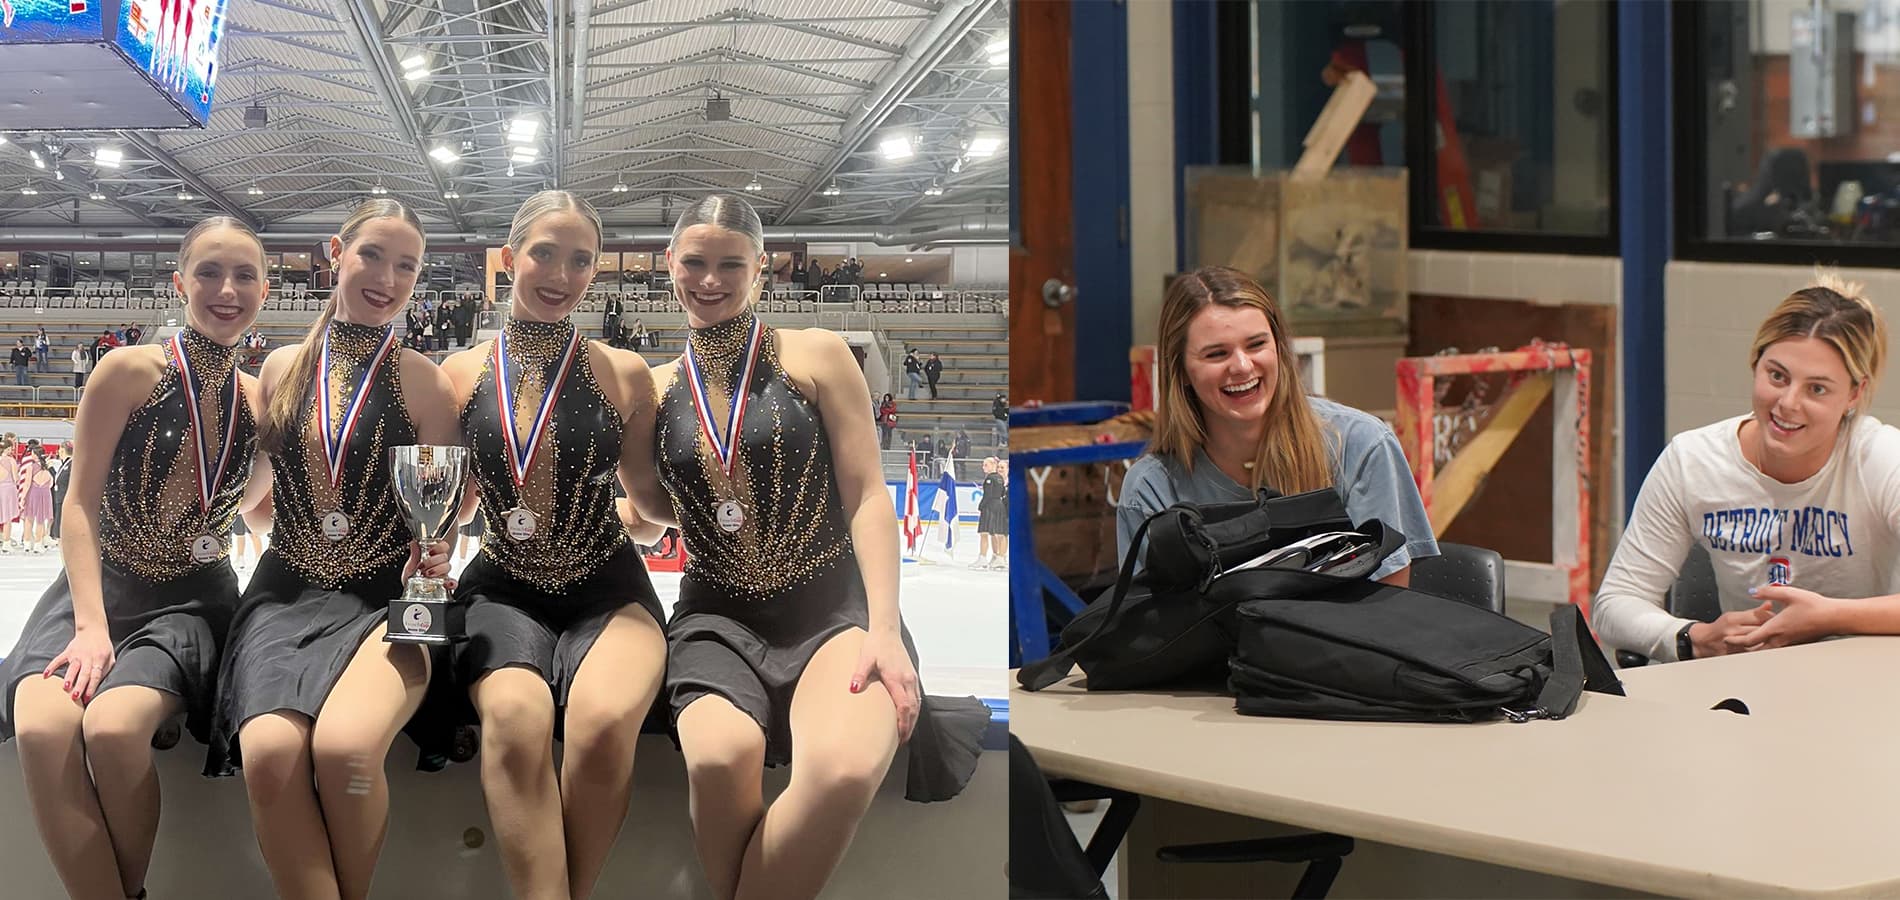 At left, four skaters wearing medals sit on the boards next to an ice rink with other people behind them. On the right, two Detroit Mercy students sit laughing inside of the College of Engineering & Sciences Building.